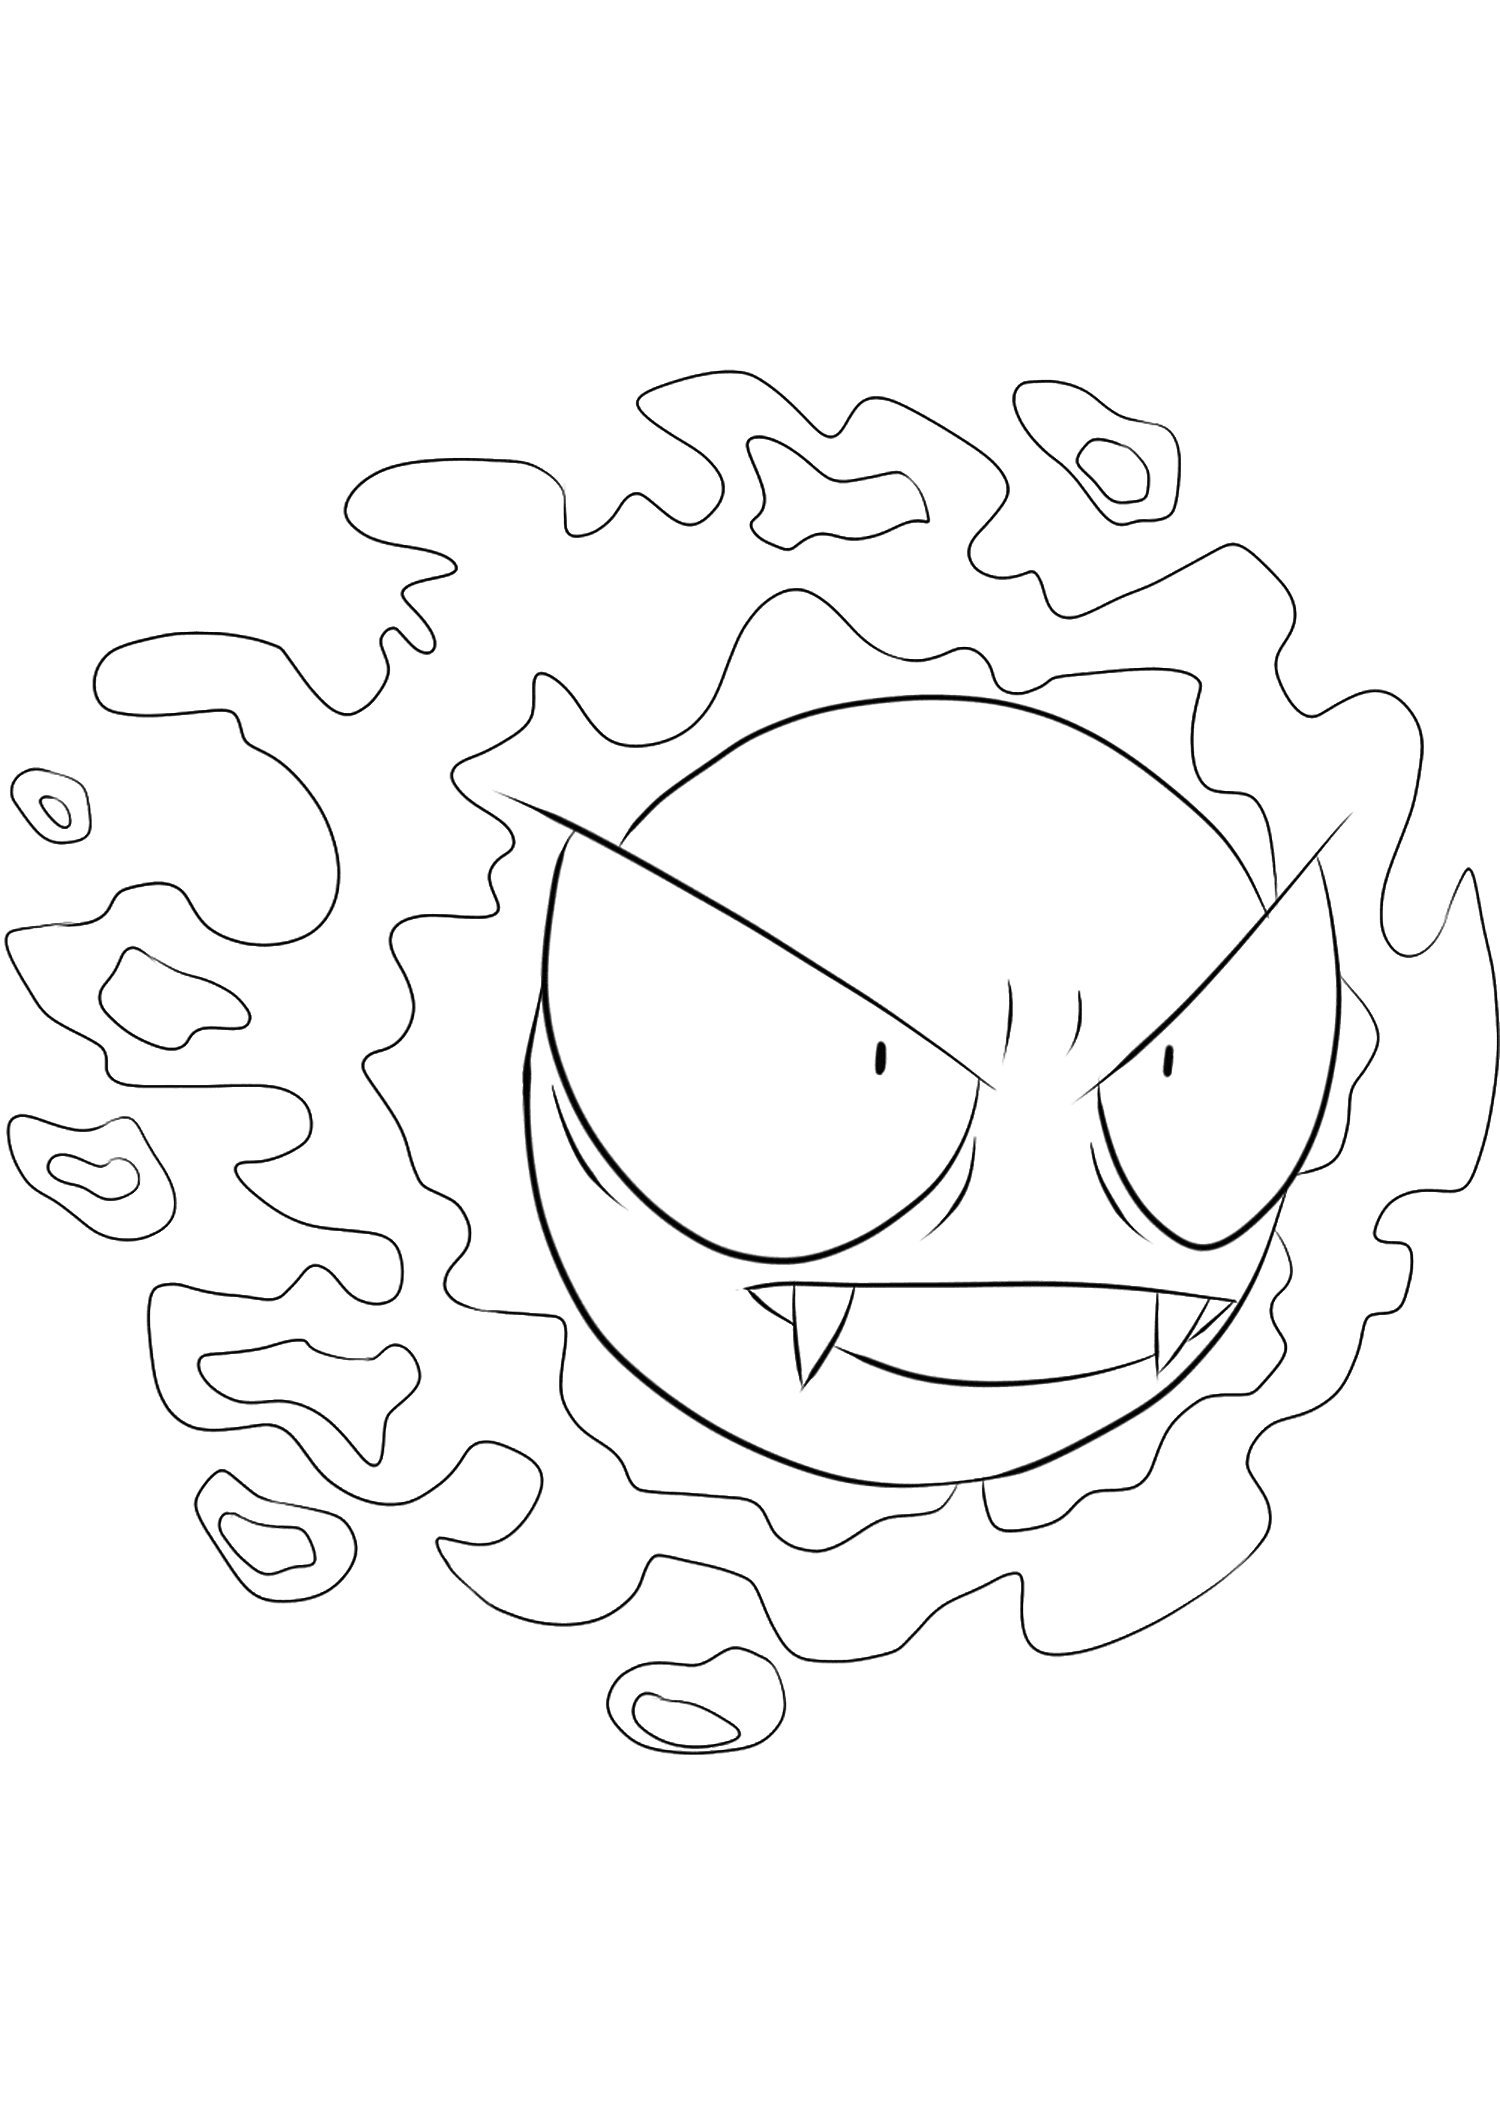 Gastly (No.92). Gastly Coloring page, Generation I Pokemon of type Ghost and PoisonOriginal image credit: Pokemon linearts by Lilly Gerbil on Deviantart.Permission:  All rights reserved © Pokemon company and Ken Sugimori.